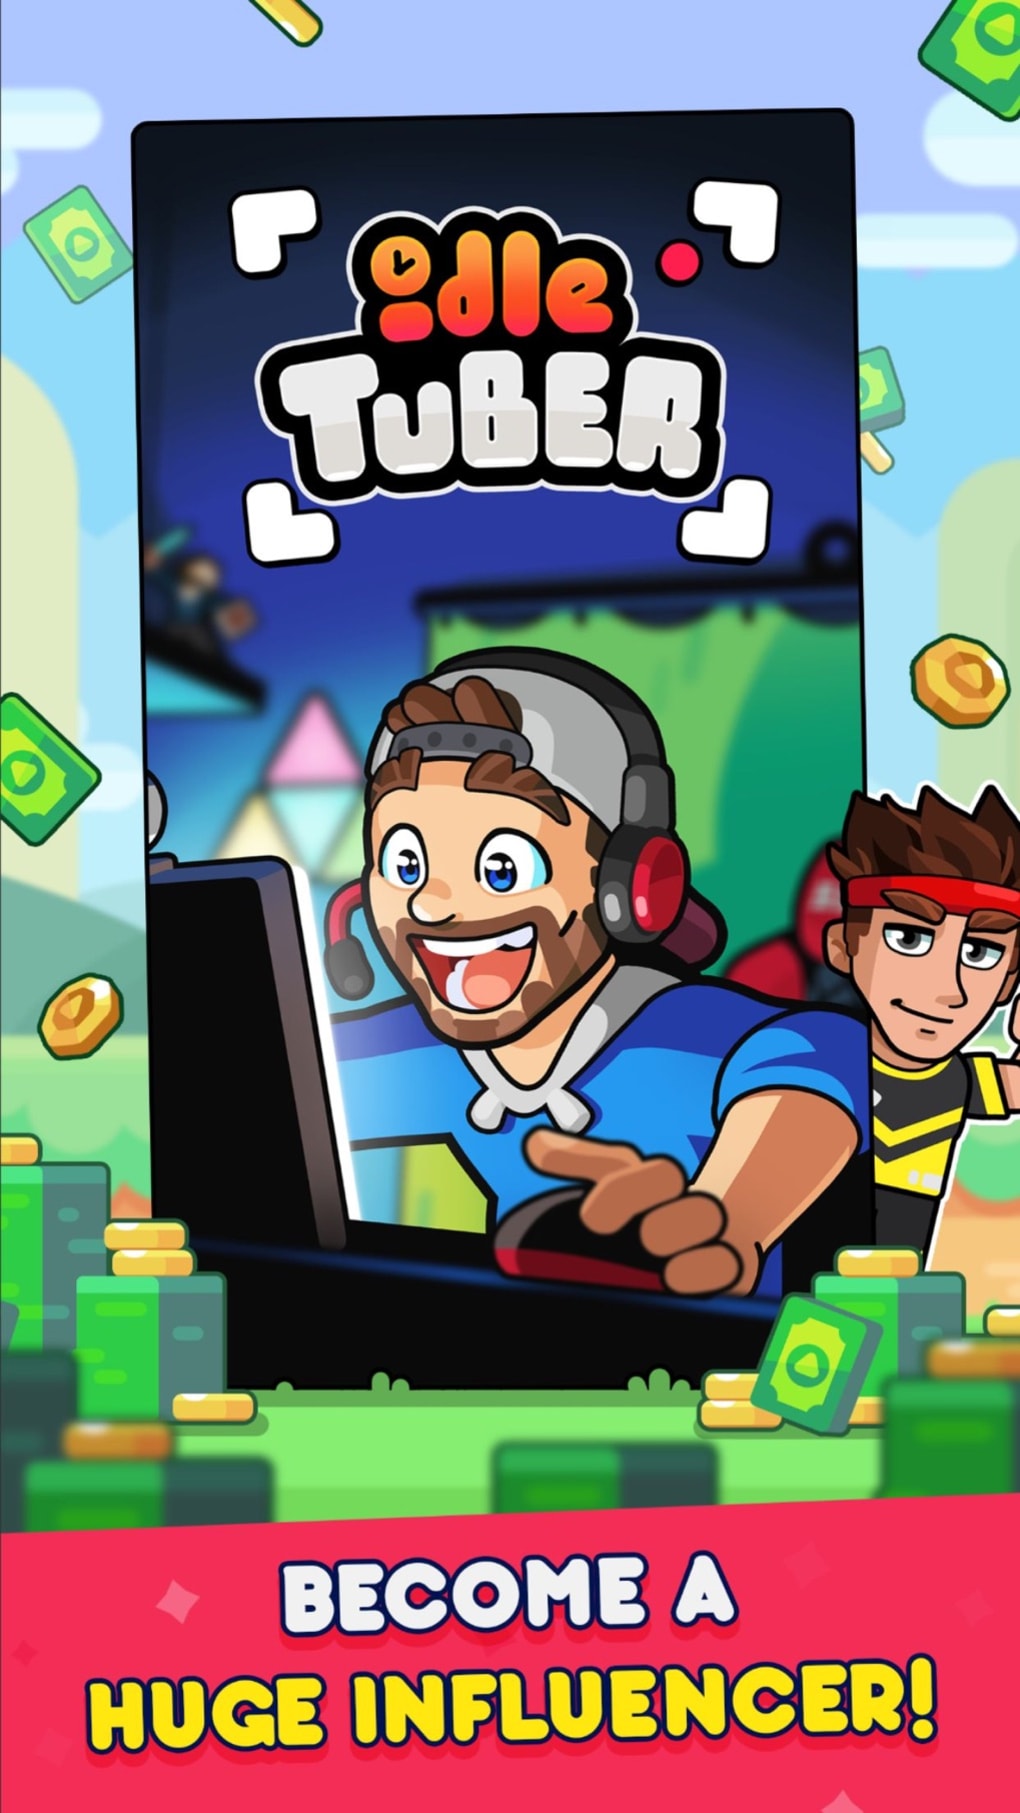 Idle Streamer - Tuber game - Apps on Google Play